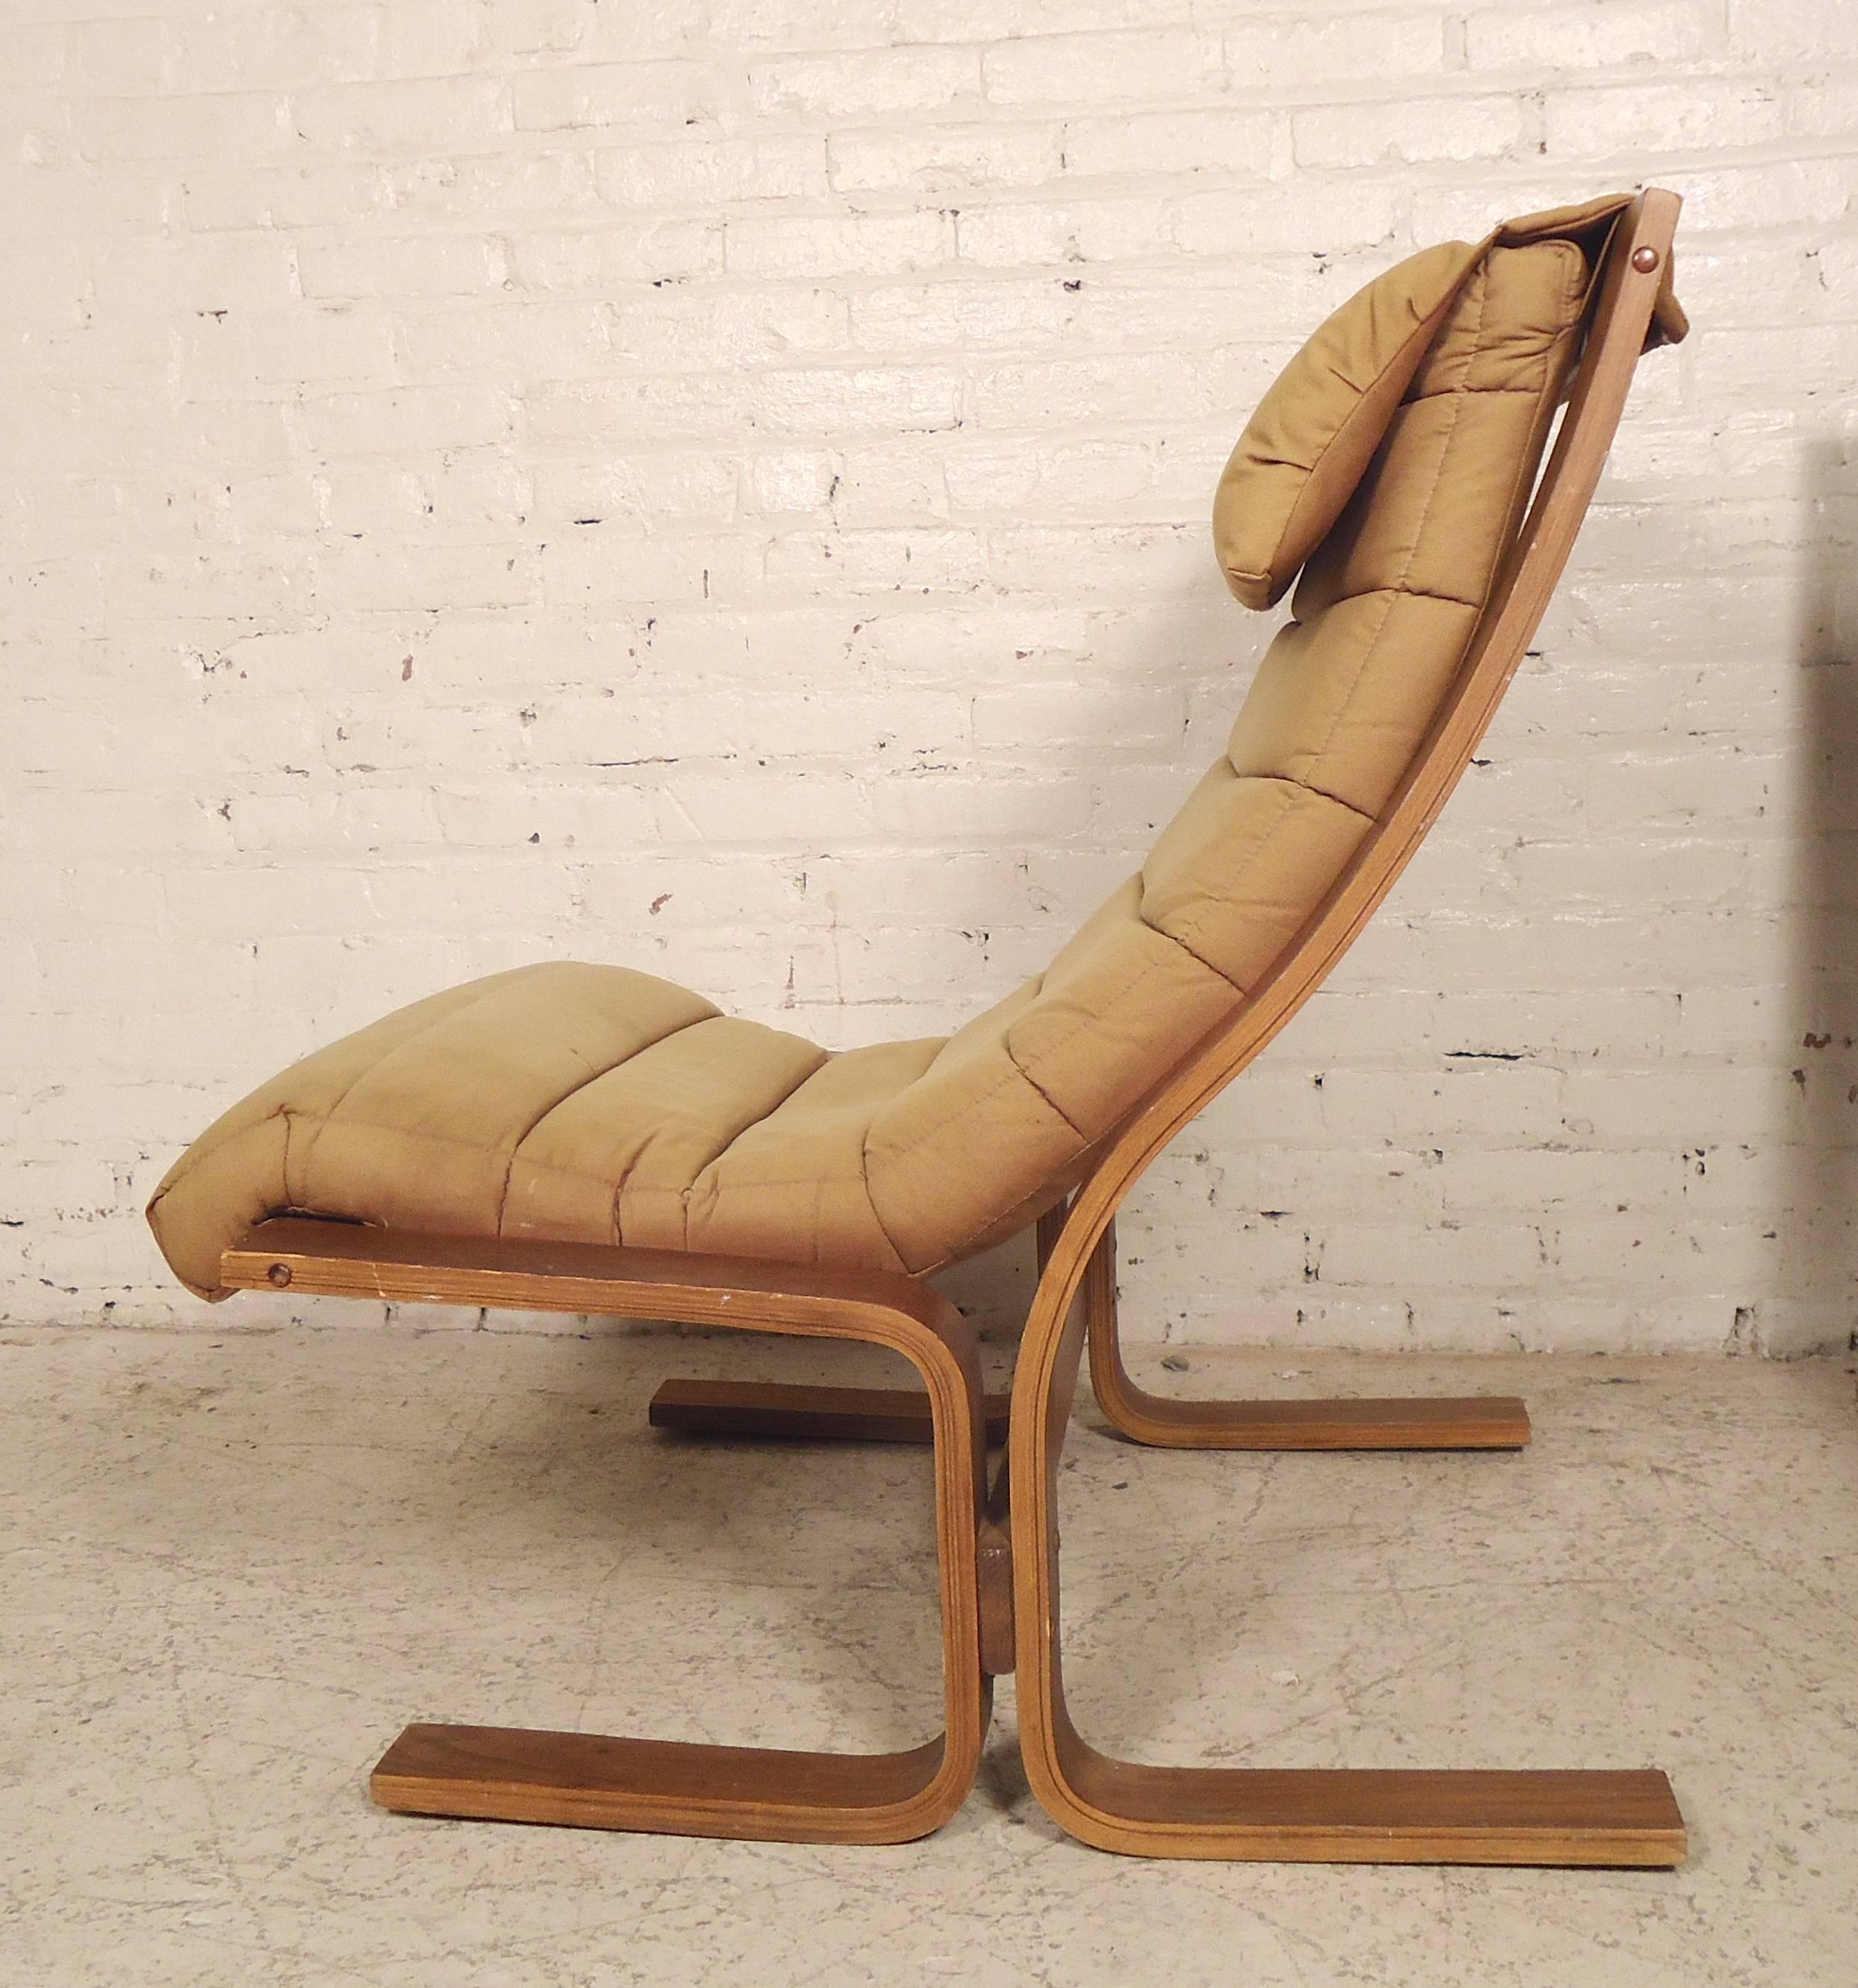 Lovely Danish modern style lounge chairs with bentwood frames and loose cushioning including headrest. These Eames era chairs show great design with comfortable aesthetic.

(Please confirm item location - NY or NJ - with dealer).
 